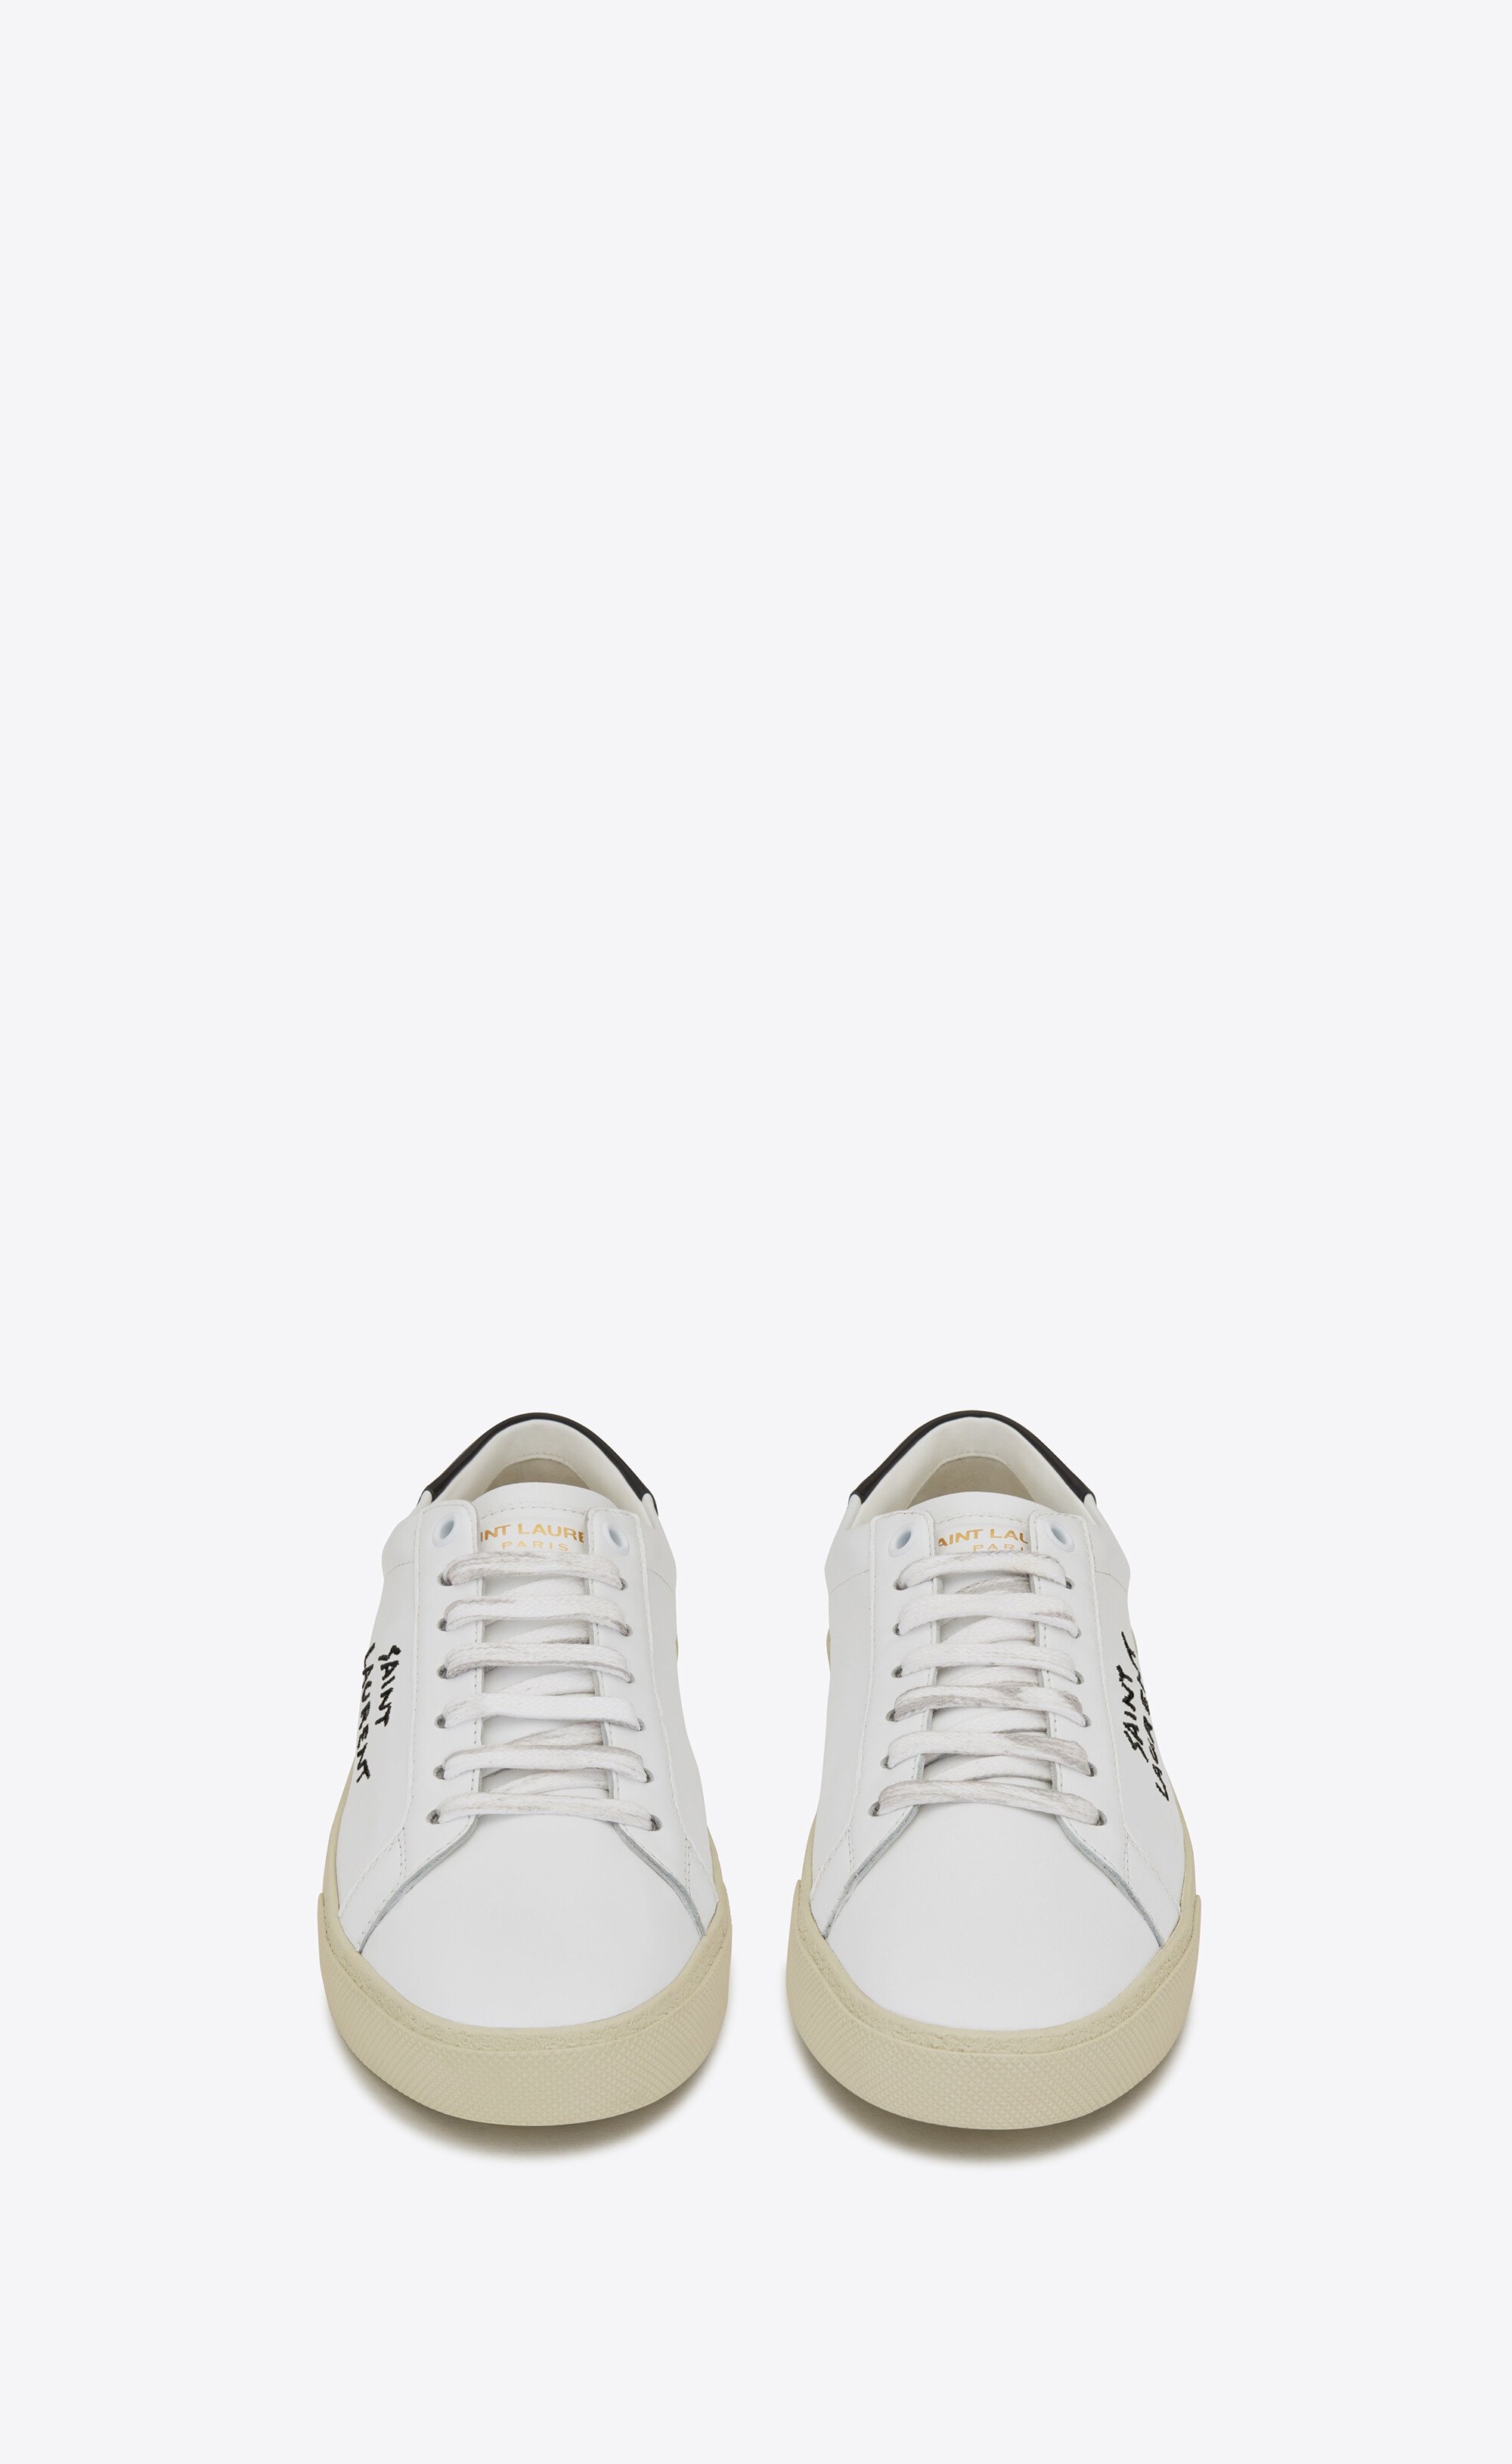 court classic sl/06 embroidered sneakers in smooth leather - 2